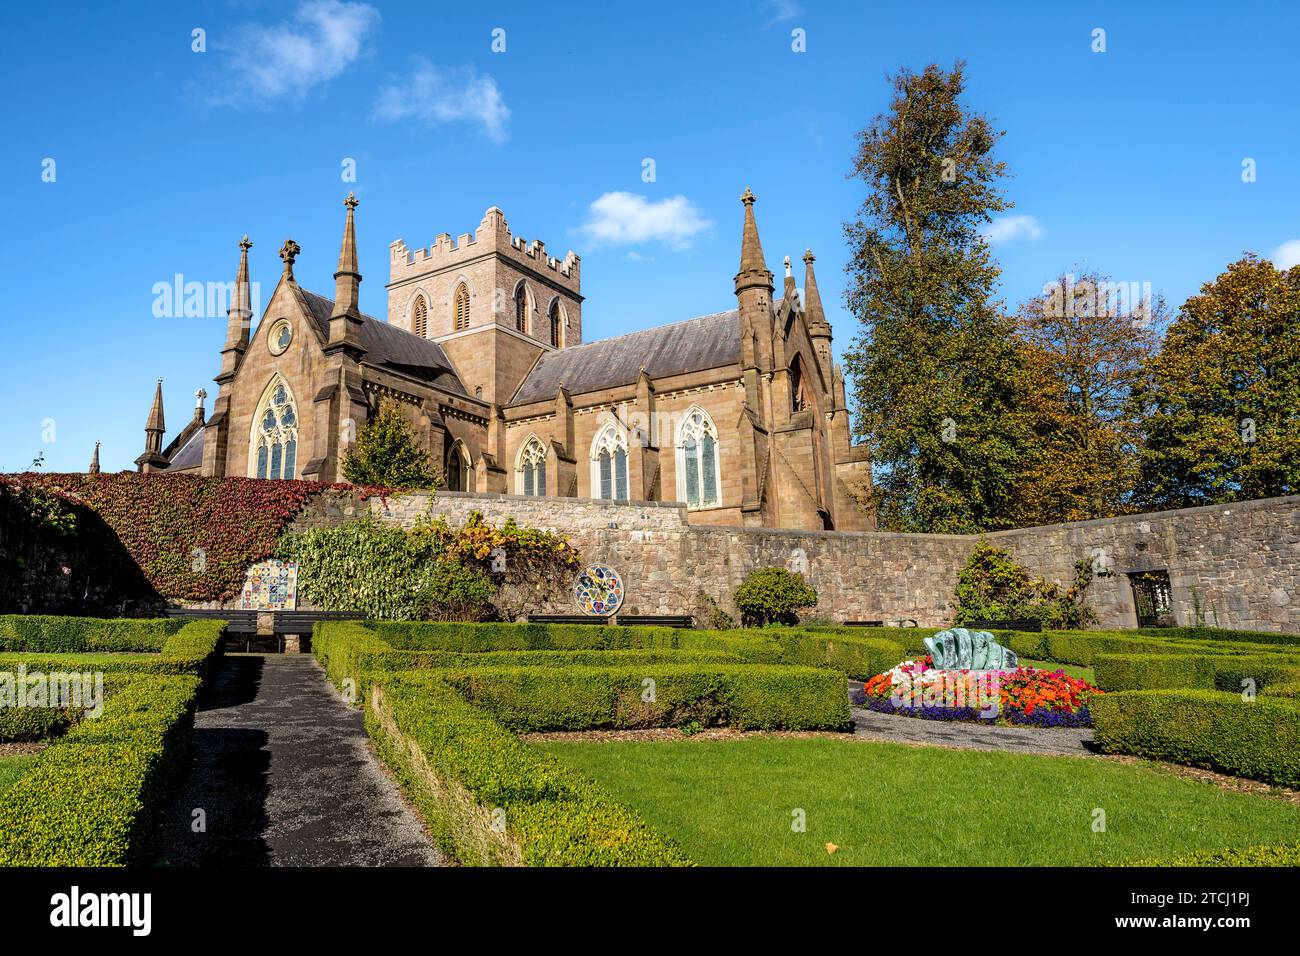 Exterior of the St Patrick's Cathedral, seat of the Anglican Archbishop of Armagh, Church of Ireland, in Armagh, Northern Ireland Stock Photo